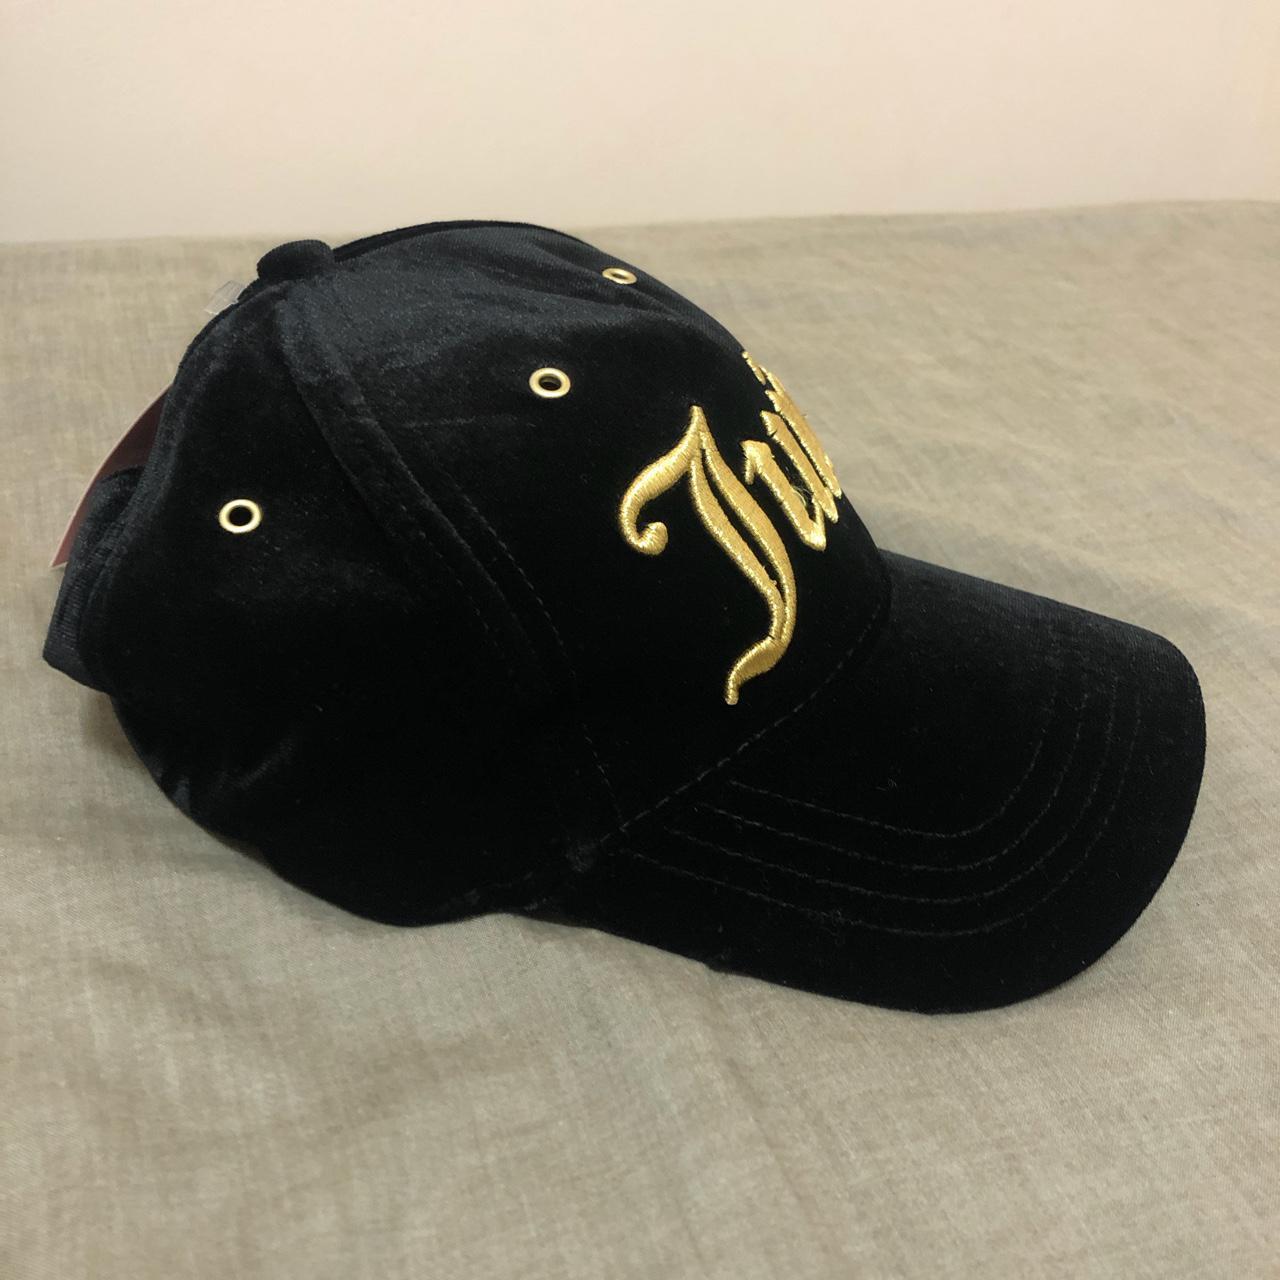 Juicy Couture Women's Black and Gold Hat (2)